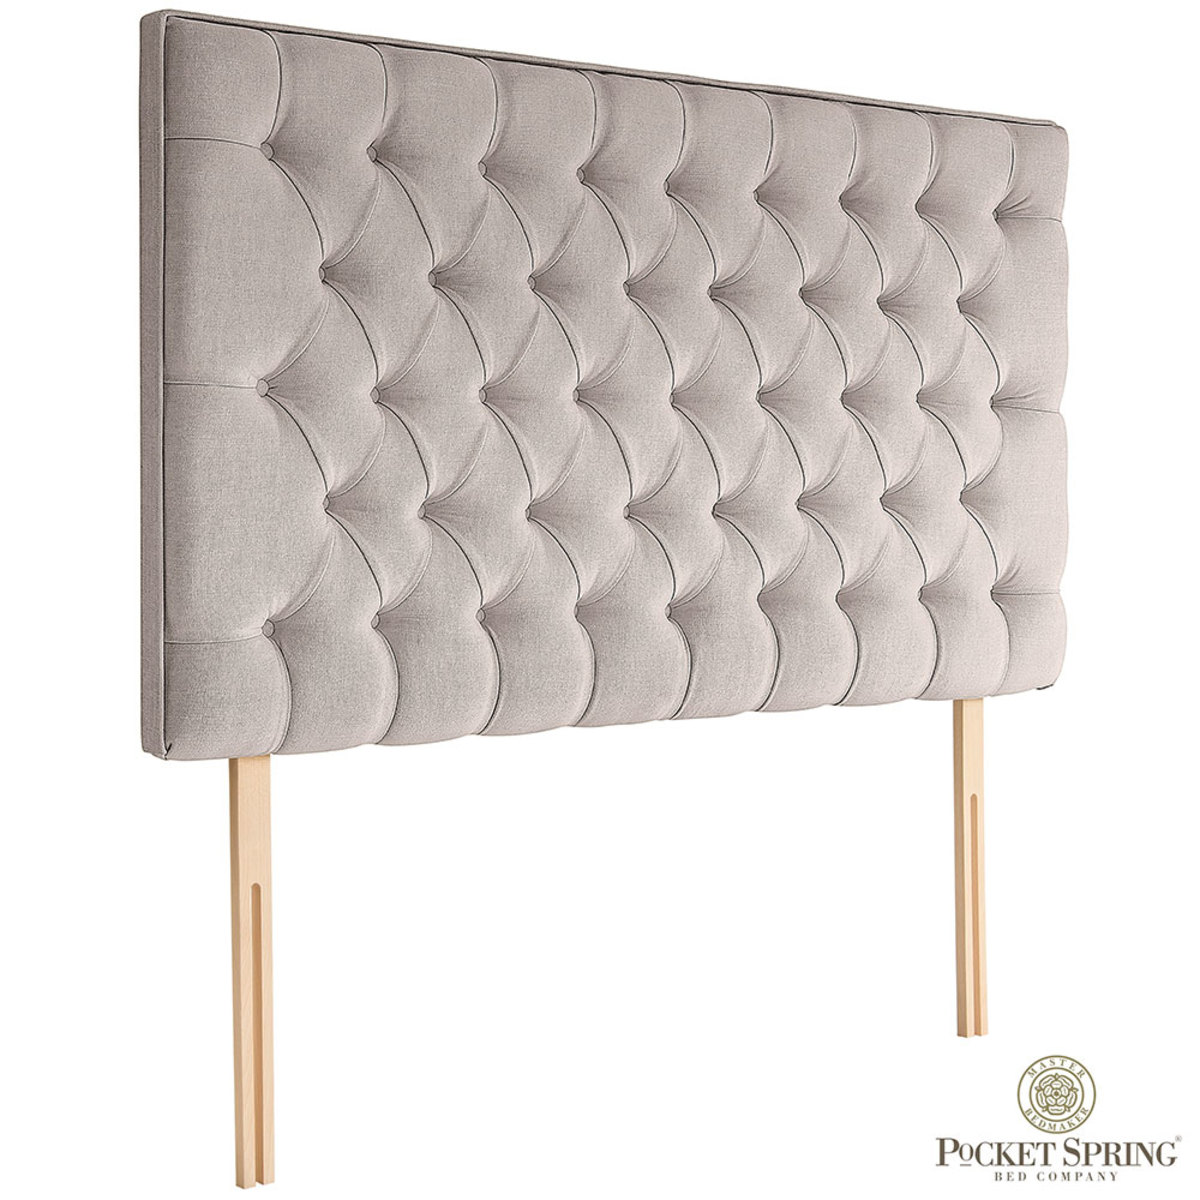 Pocket Spring Bed Company Florence, King Fabric Headboard Beds